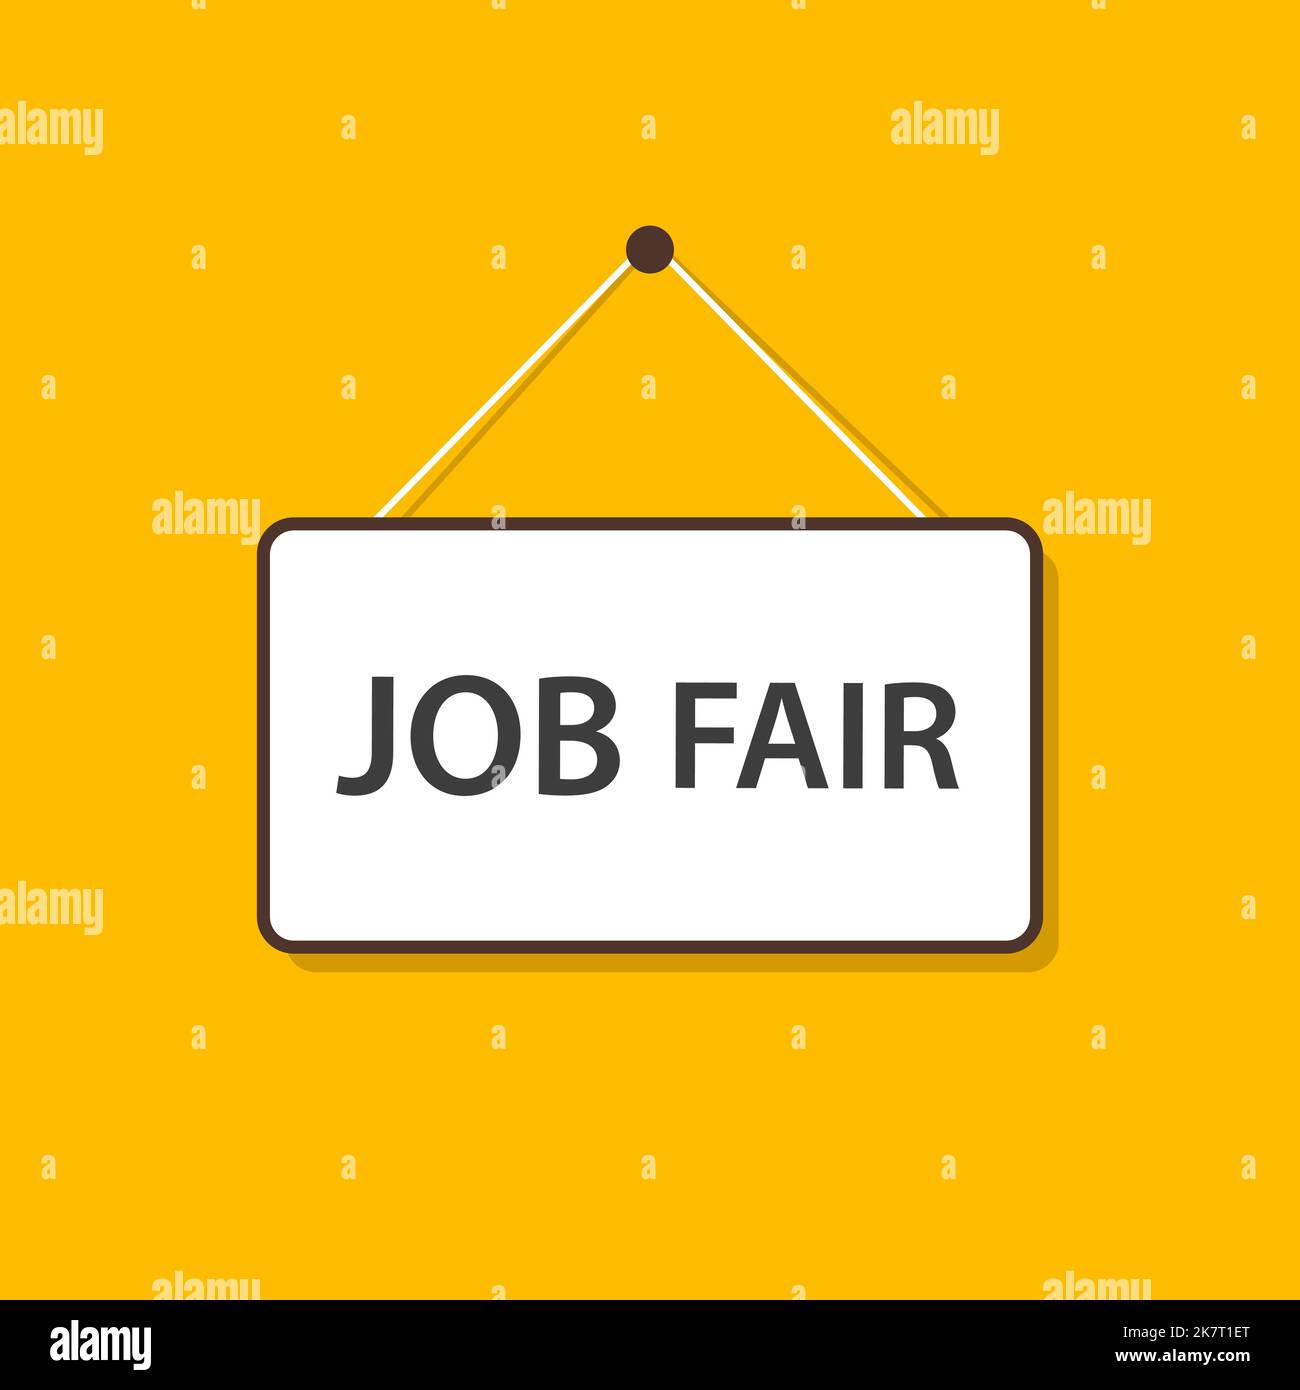 Job fair hanging sign vector human resource management concept for flyers, banners, presentations and posters. Stock Vector